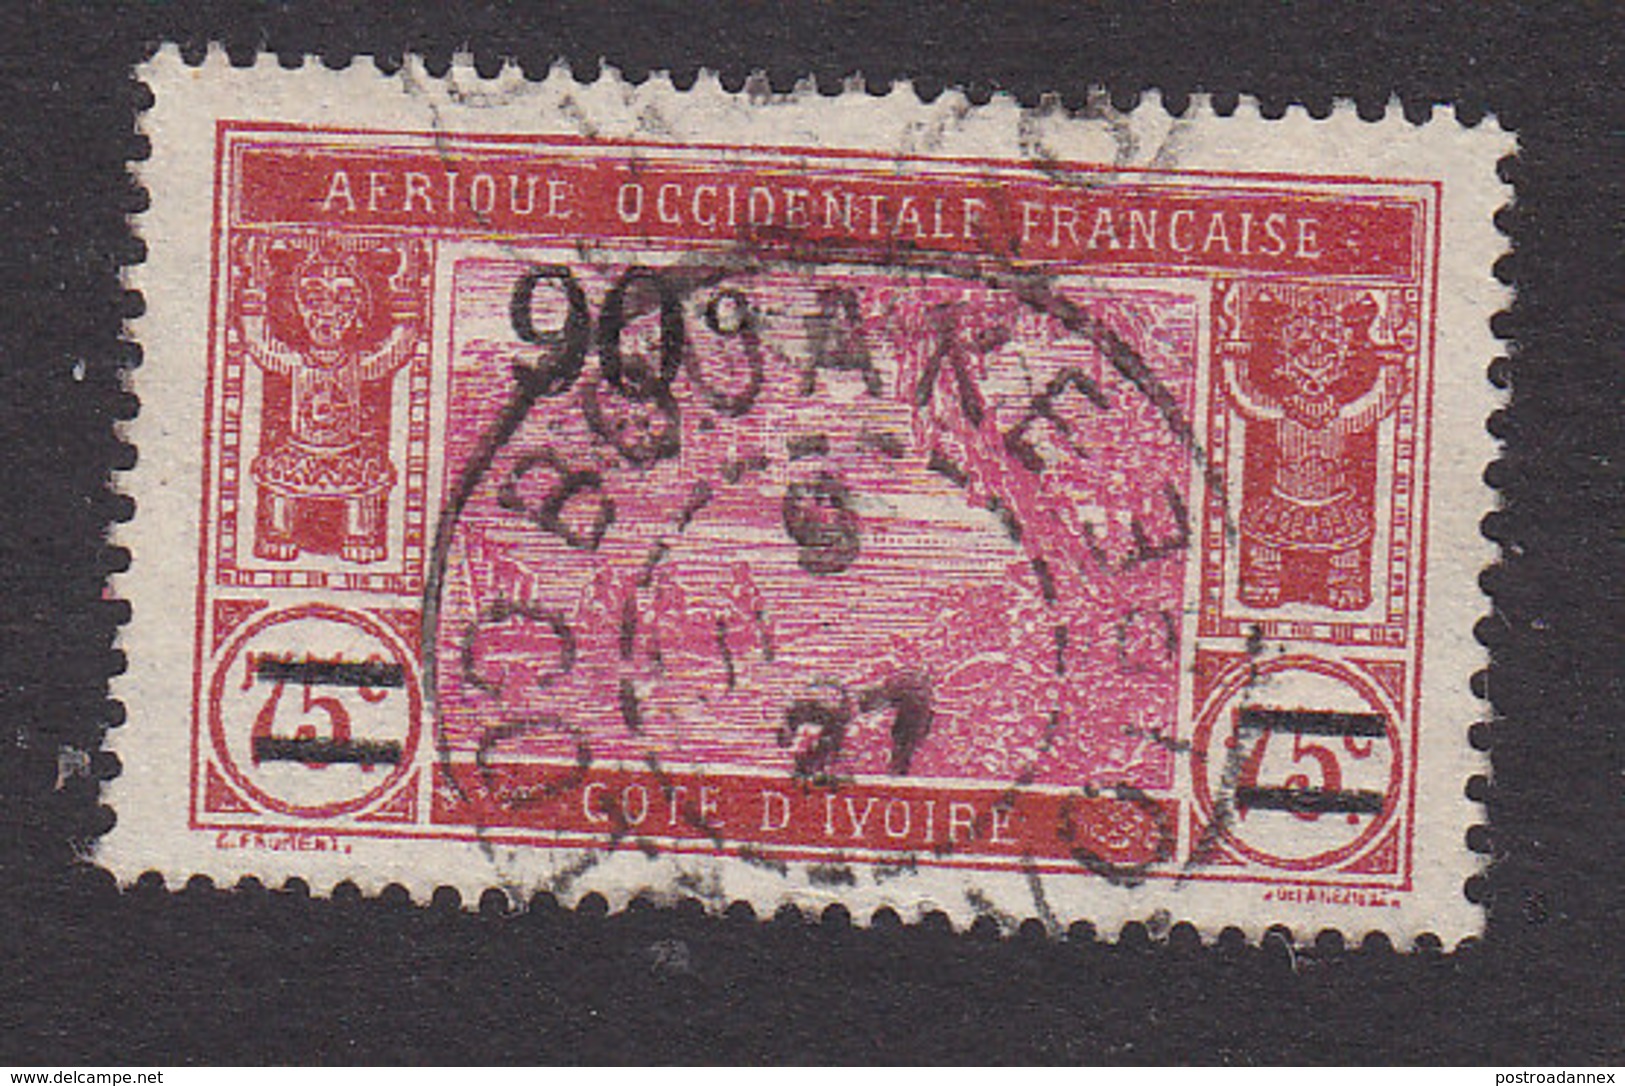 Ivory Coast, Scott #86, Used, River Scene Surcharged, Issued 1924 - Oblitérés